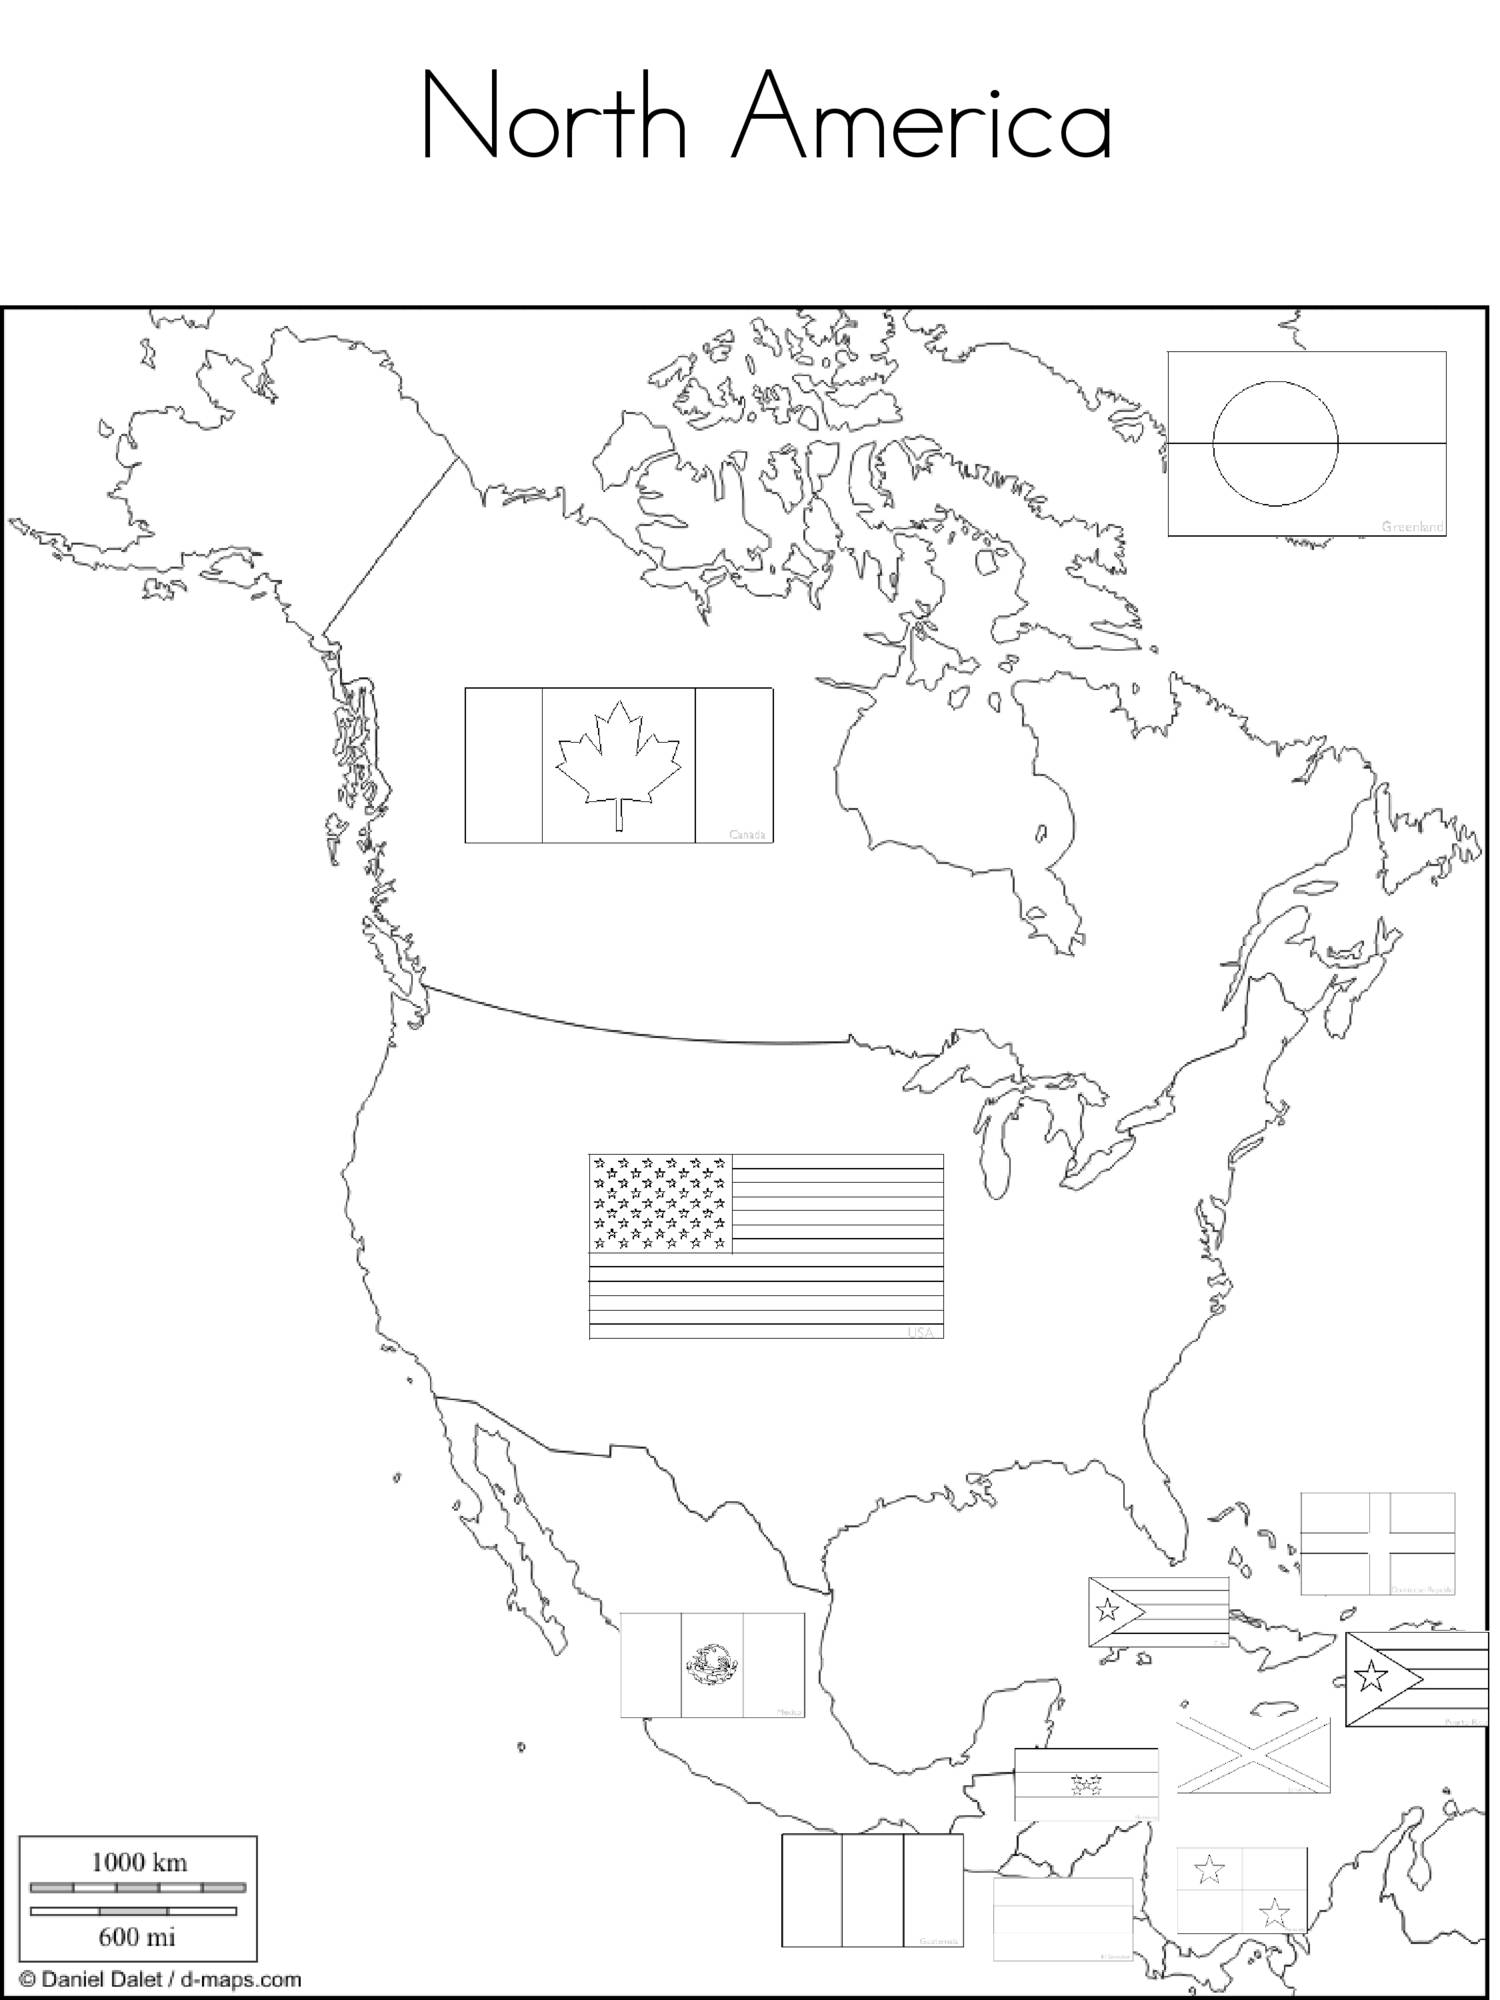 flags-on-map-coloring-pages-northamerica-southamerica-europe-africa-pdf